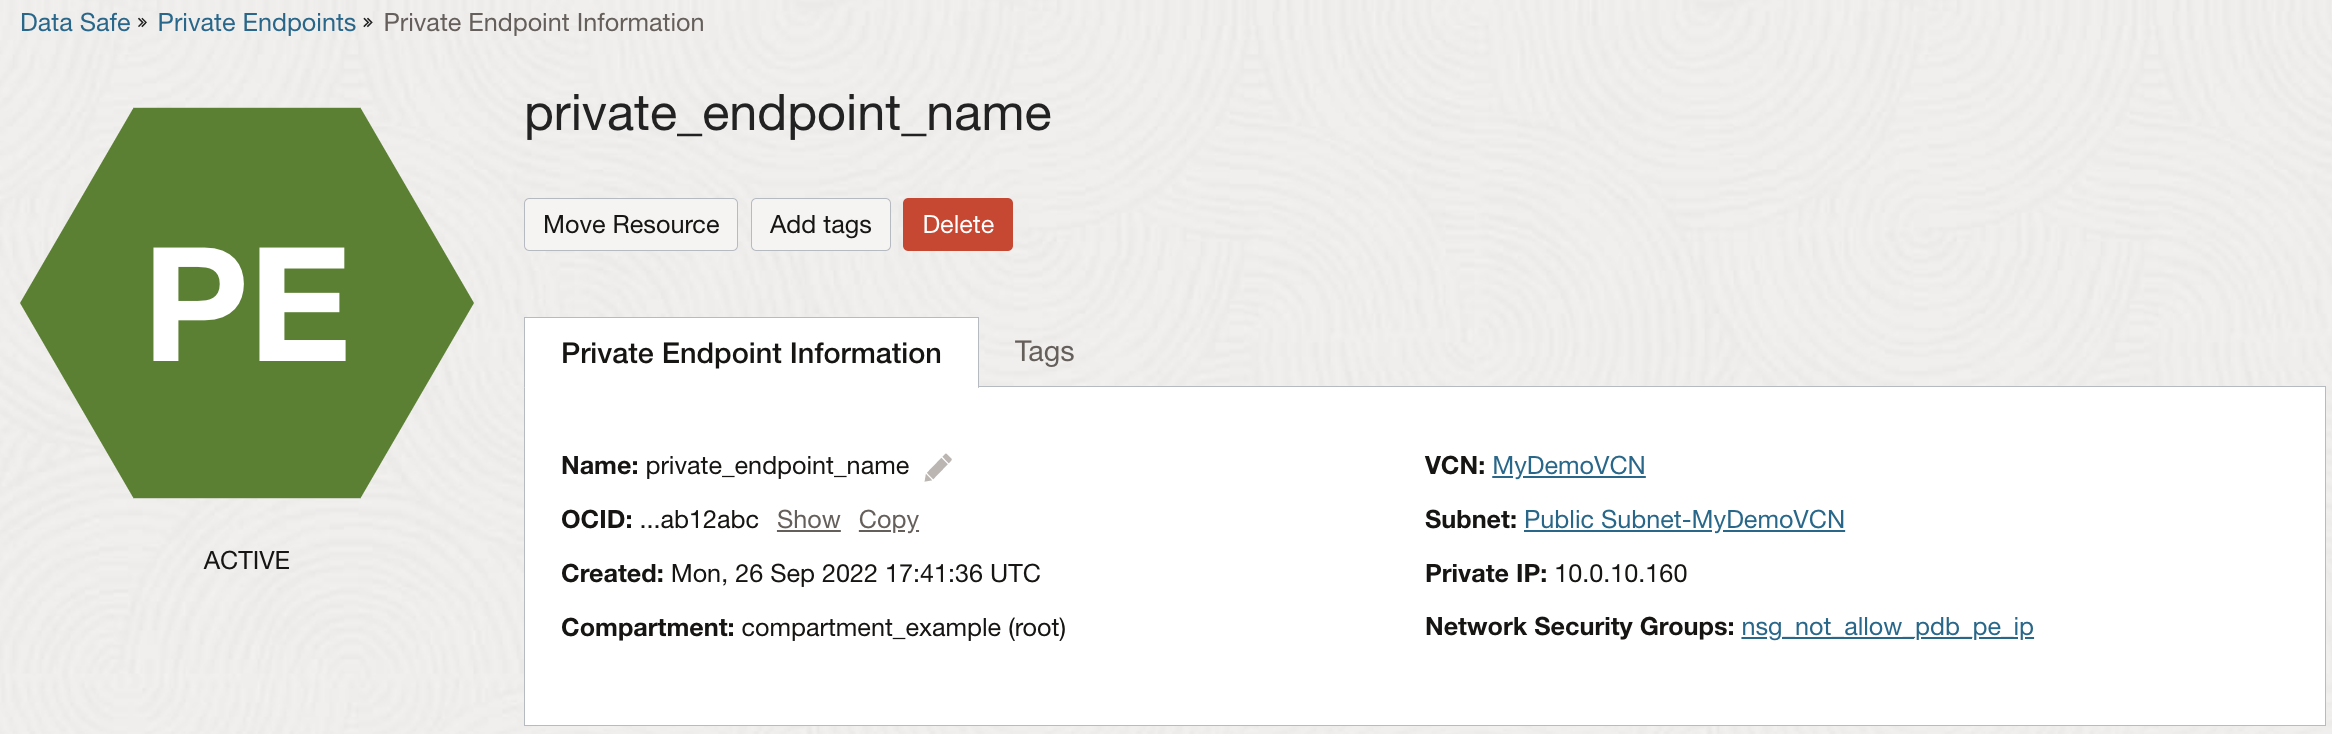 Private Endpoint Information tab